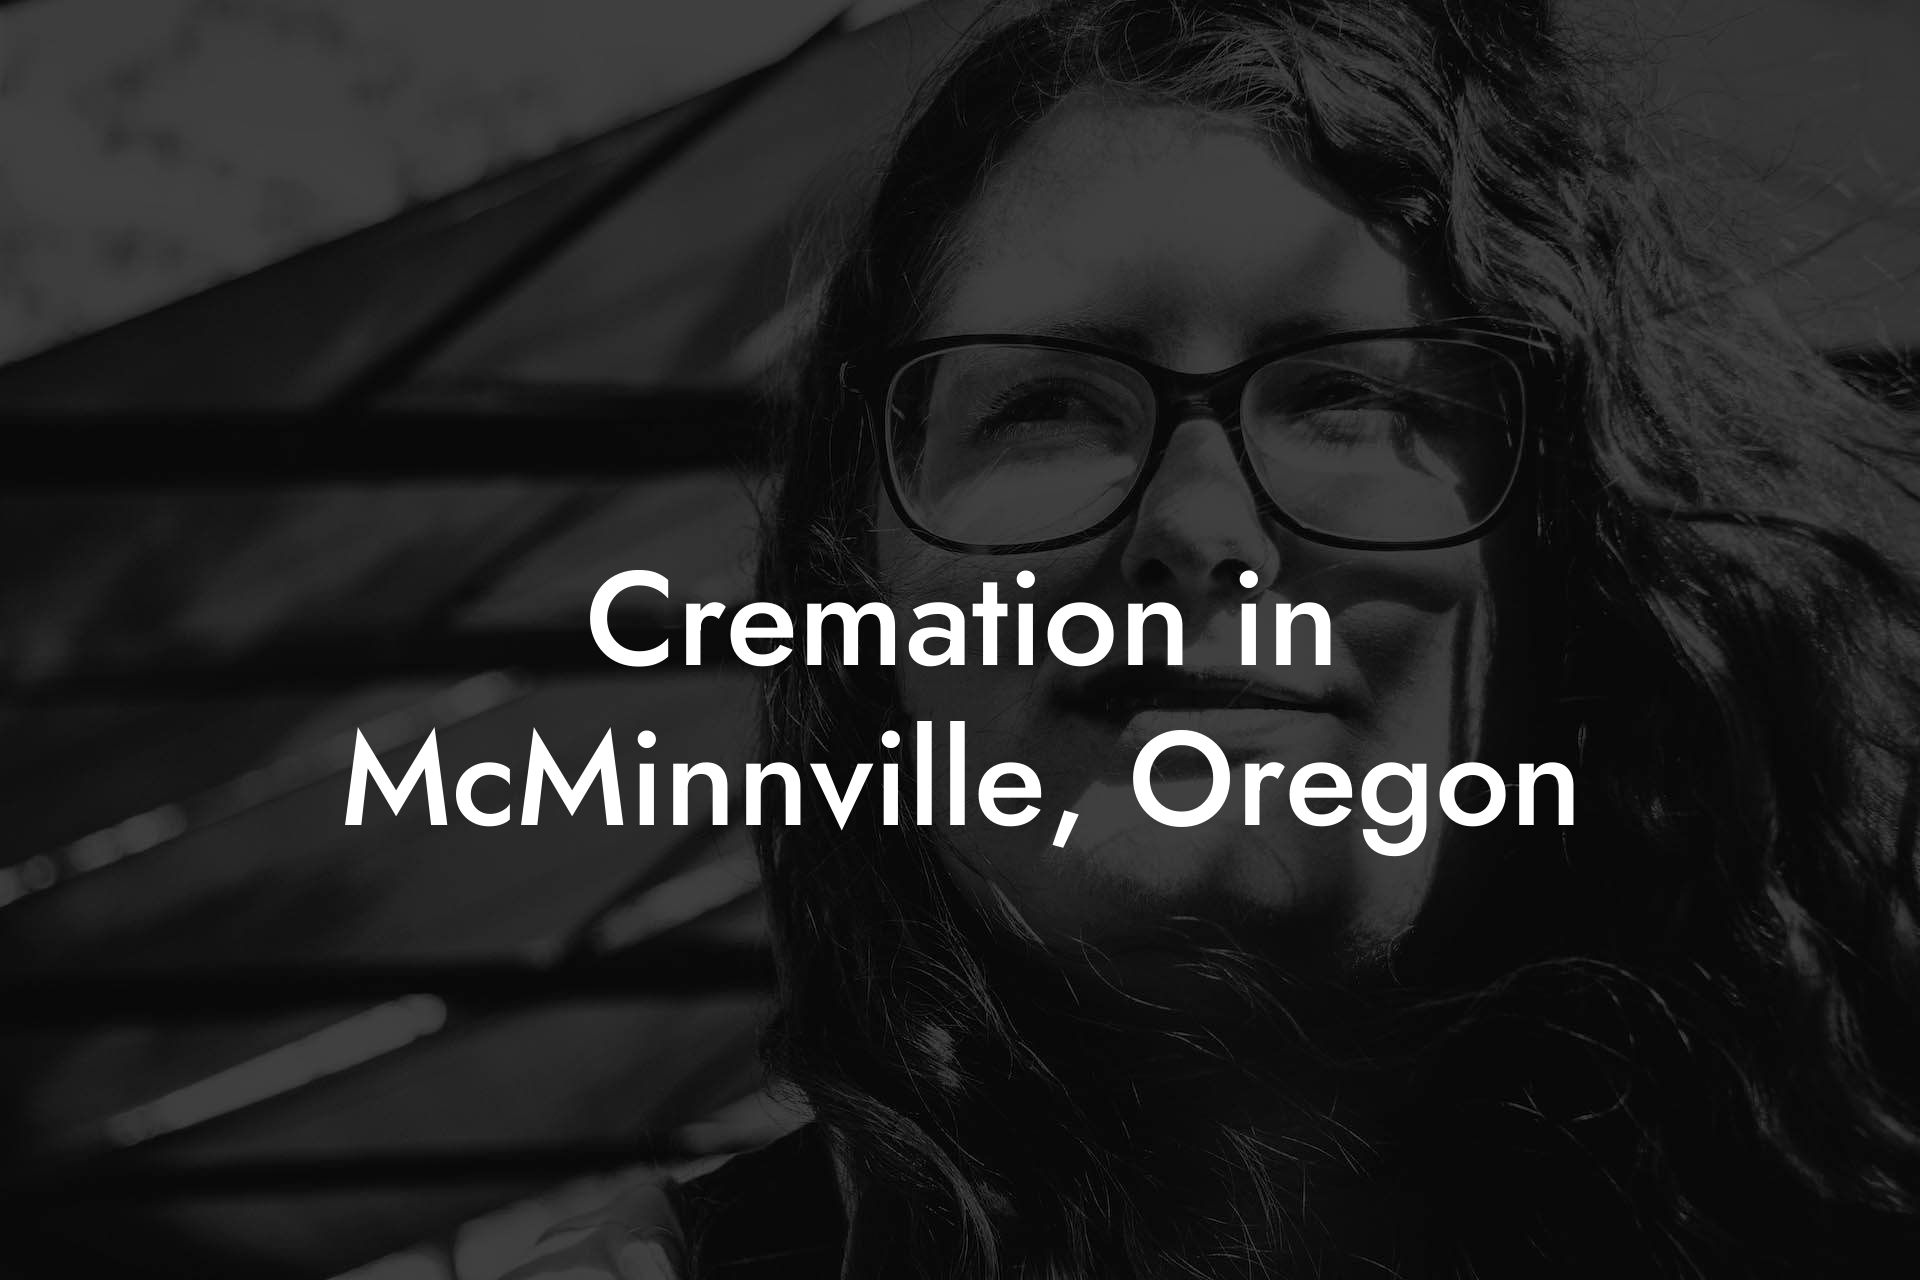 Cremation in McMinnville, Oregon